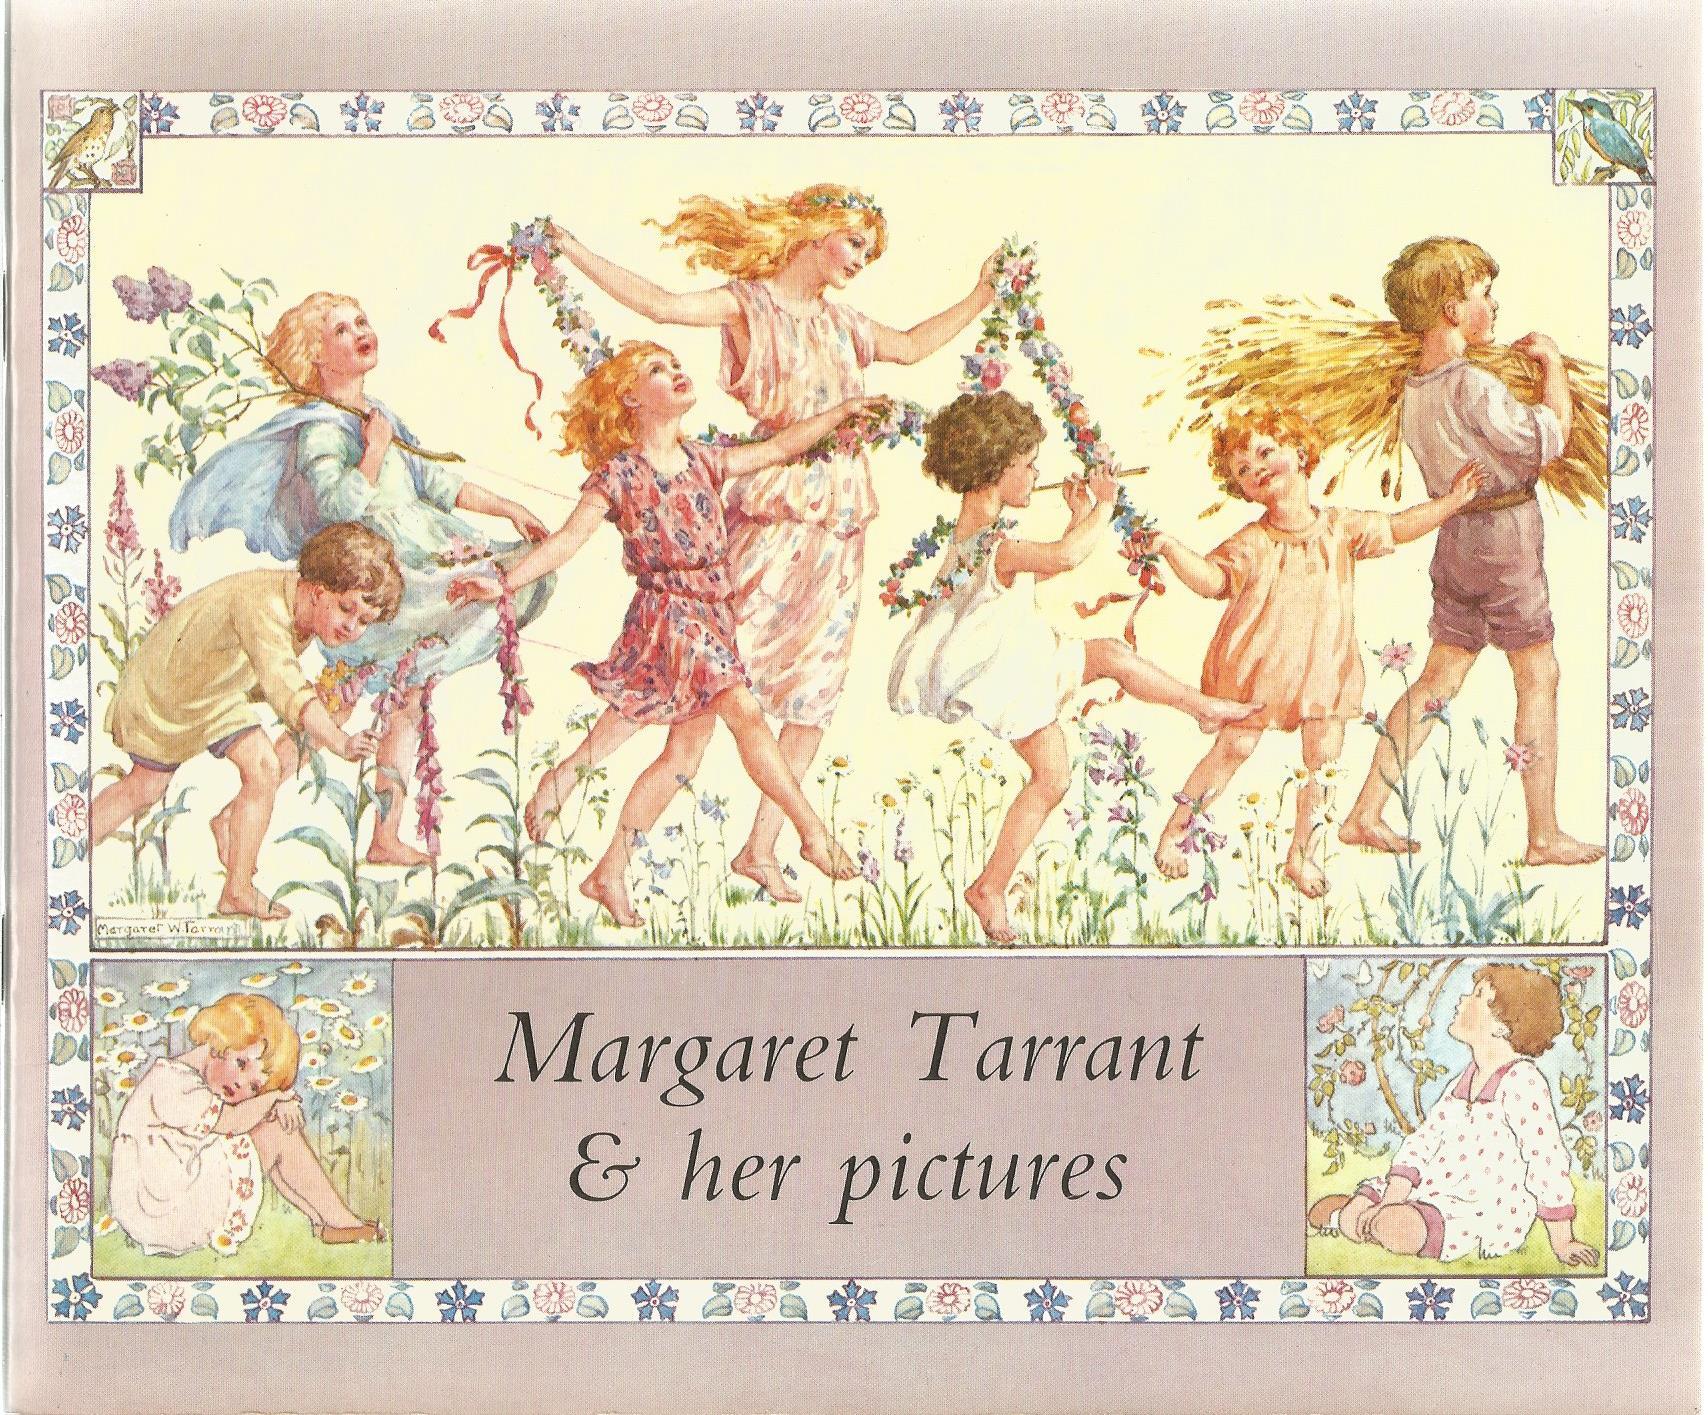 Margaret Tarrant and her pictures. by GURNEY, John. With illustrations by  Margaret TARRANT.: (1982) | John Williams